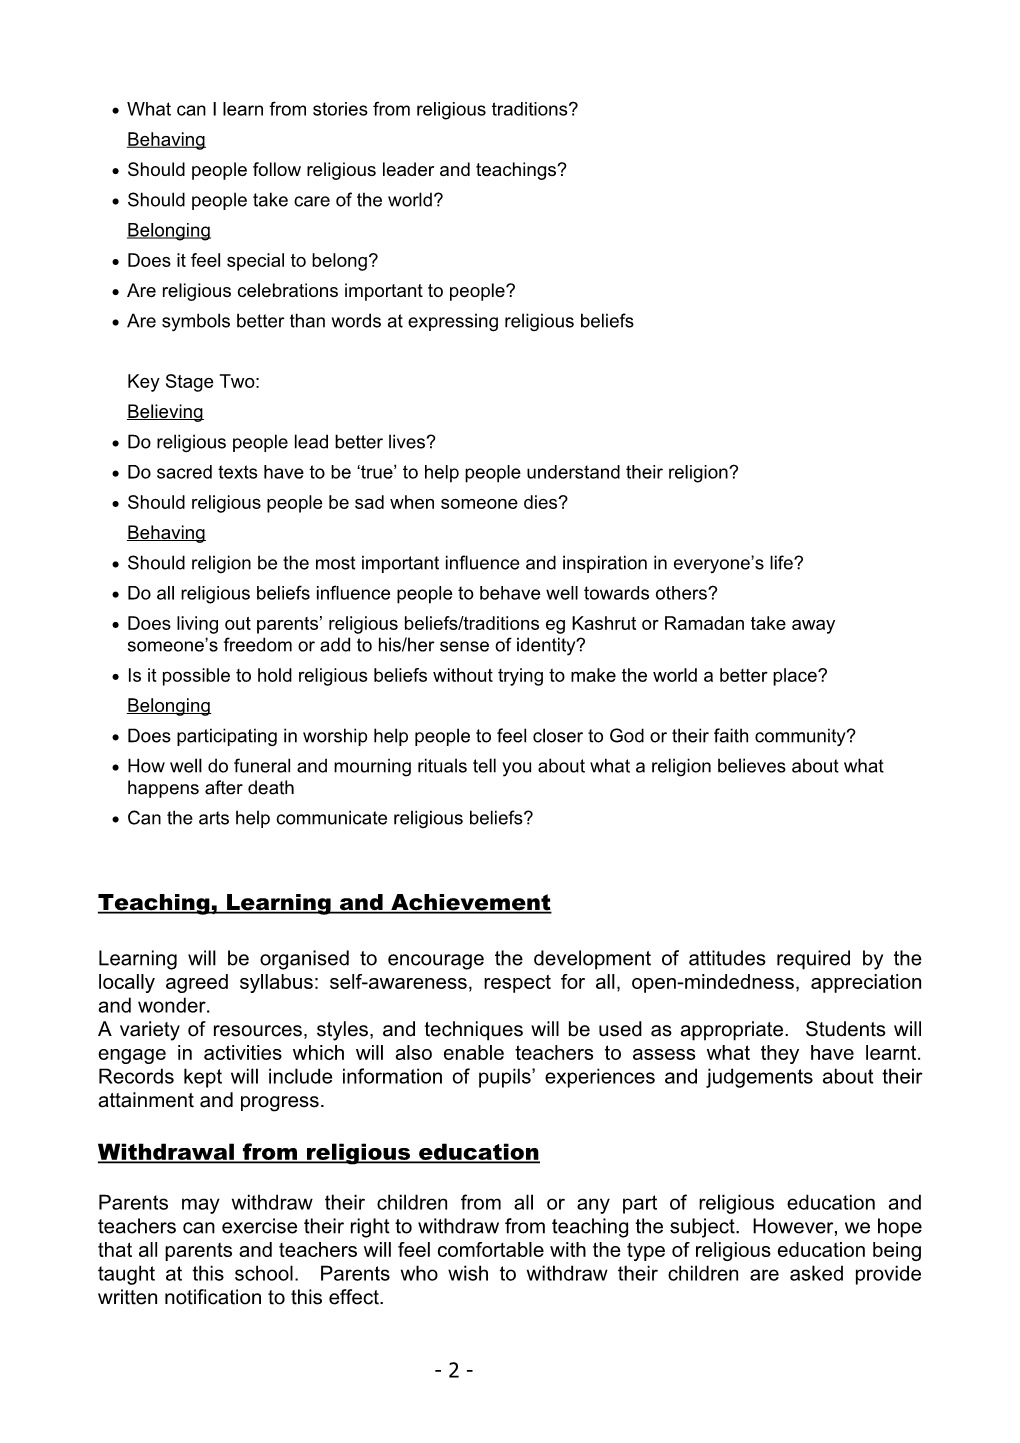 School Policy Statement for Religious Education